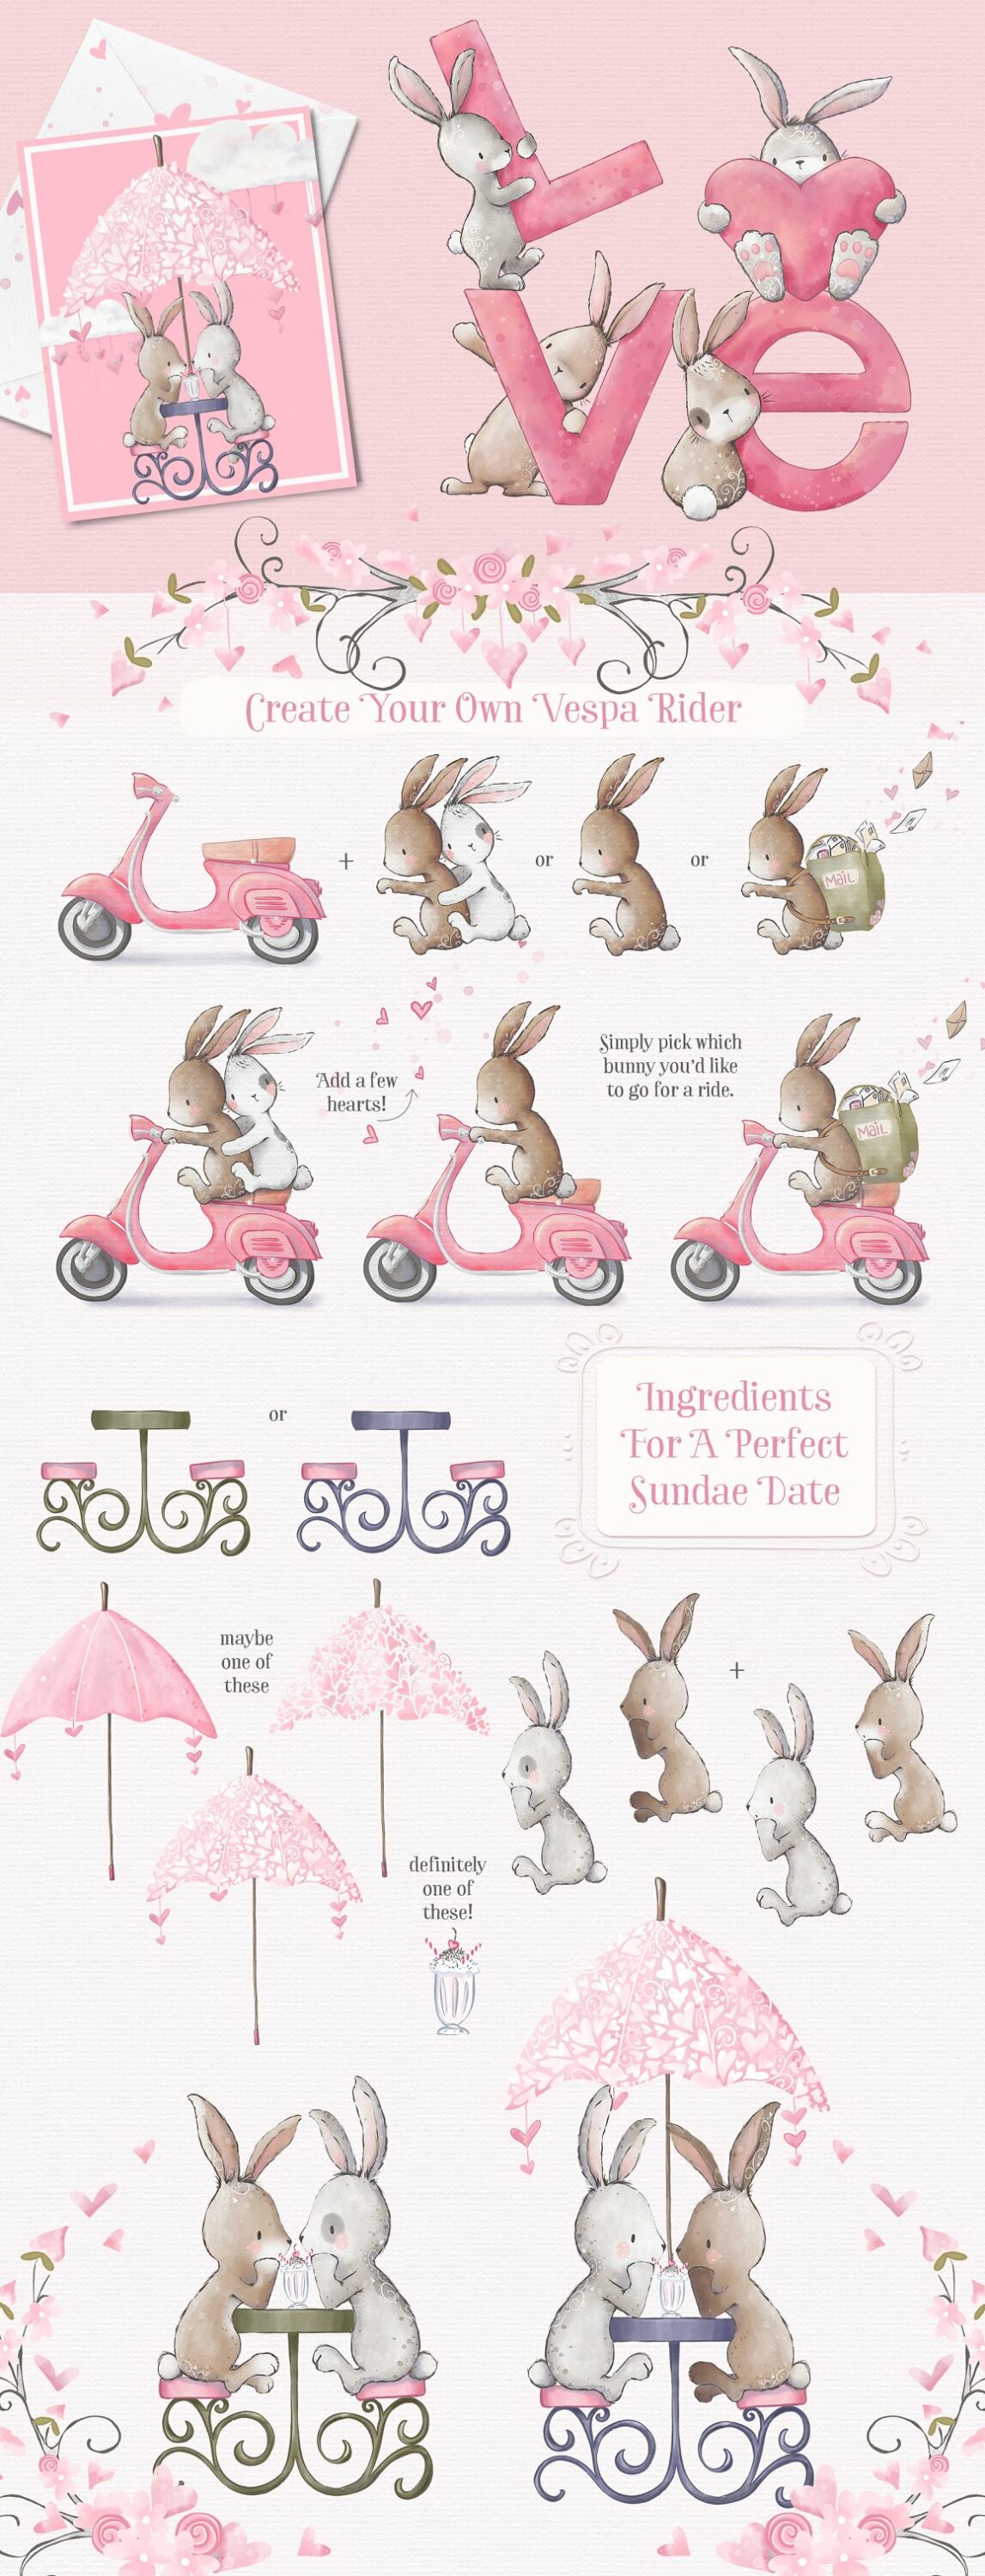 A set of 9 different illustrations of a bunny and DIY elements on a pink background.